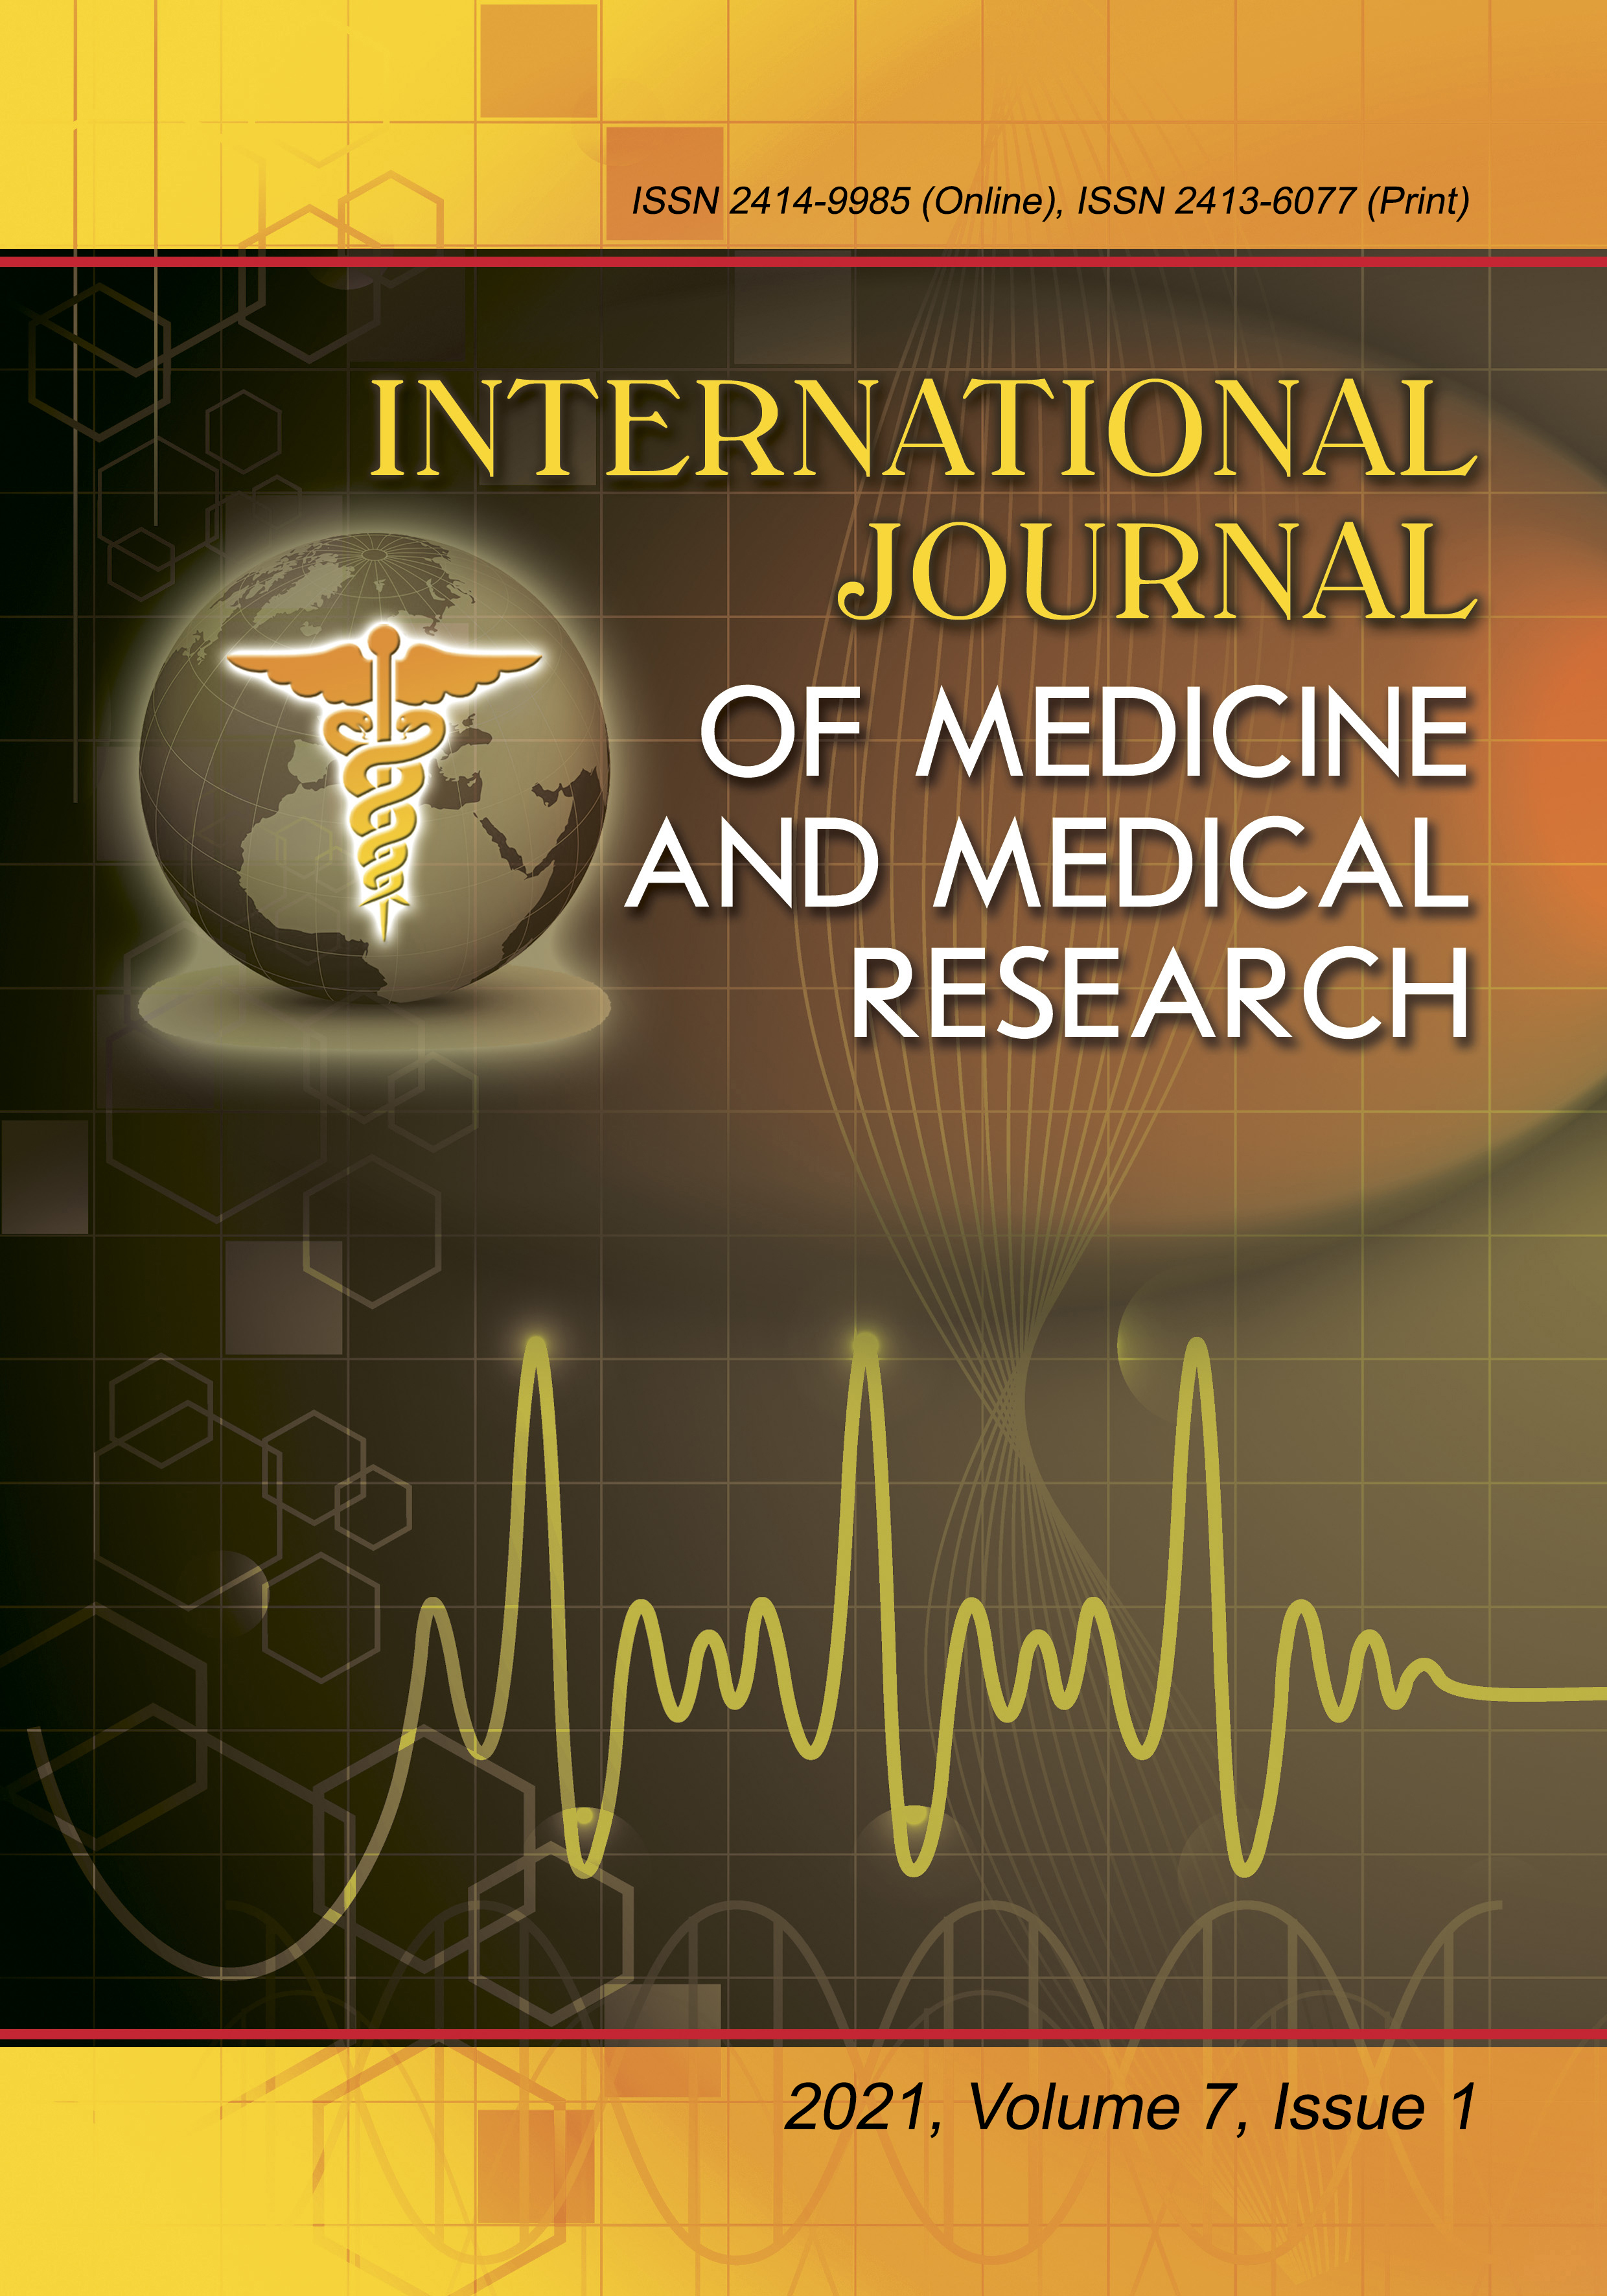 					View Vol. 7 No. 1 (2021): International Journal of Medicine and Medical Research
				